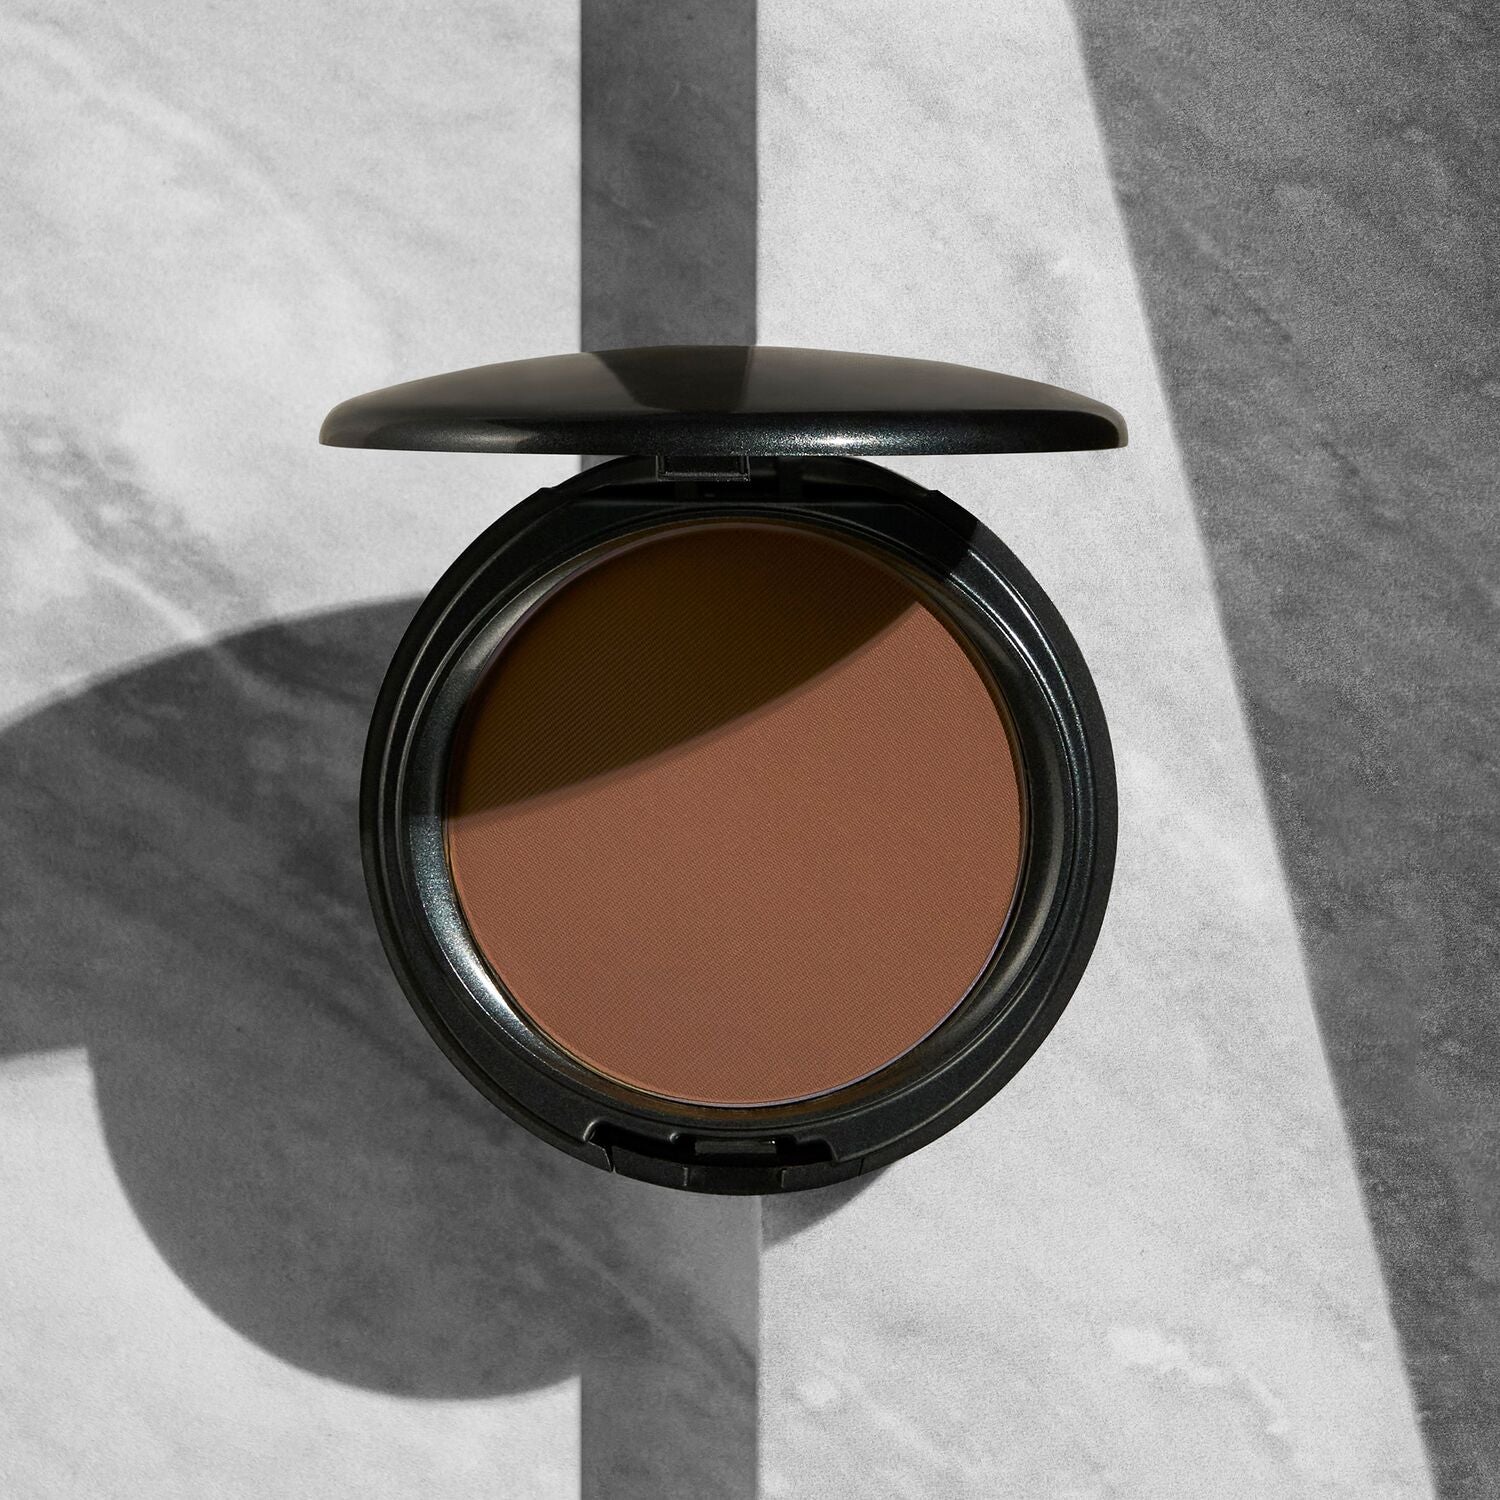 Coverfx Pressed Mineral Foundation in shade D4